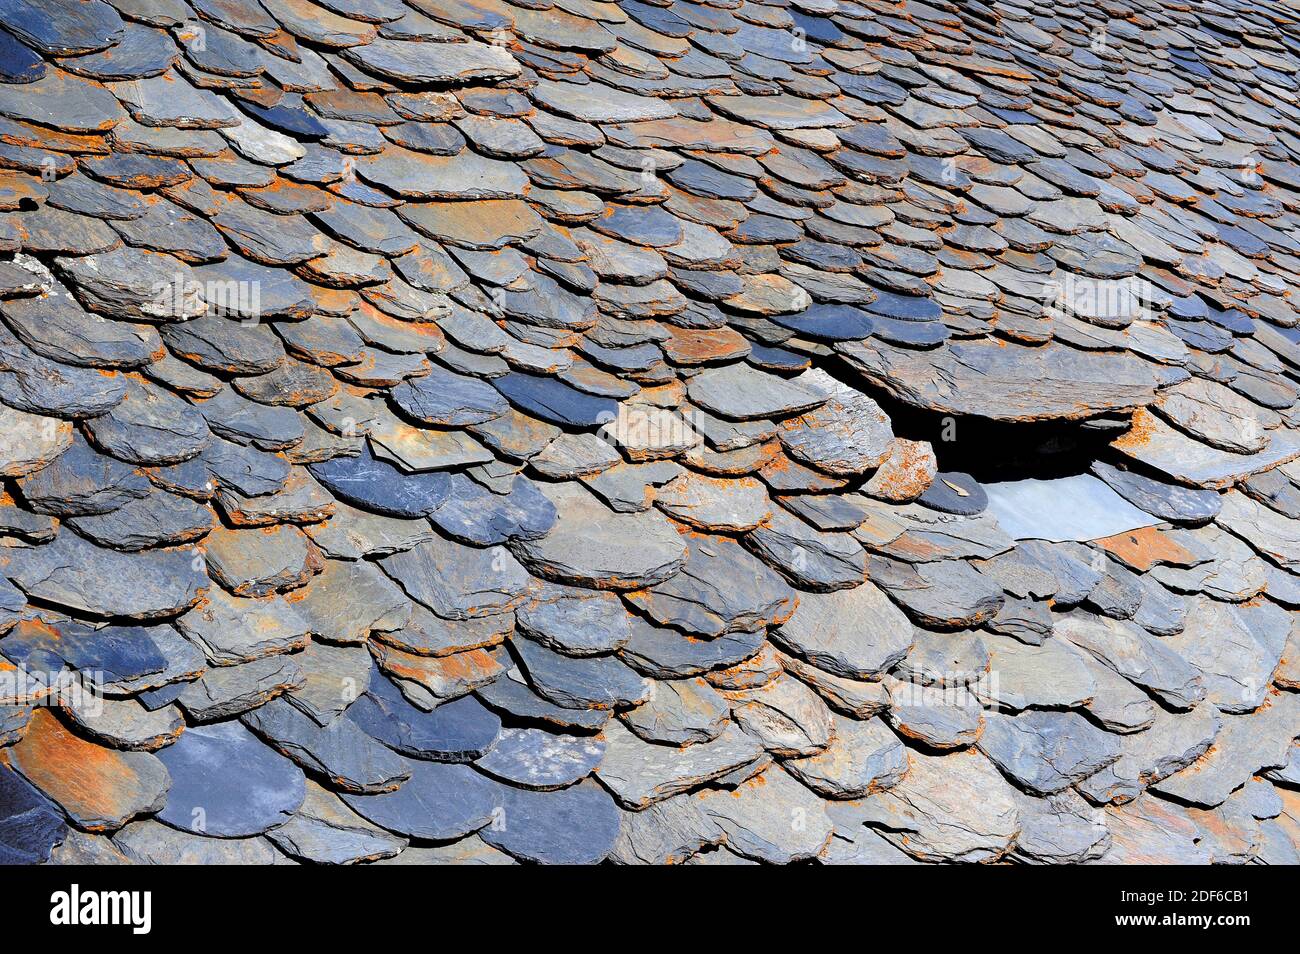 Roof shale. Shale is a fissile compacted sedimentary rock. This photo was taken in Pallars Sobira, Lleida, Catalonia, Spain. Stock Photo